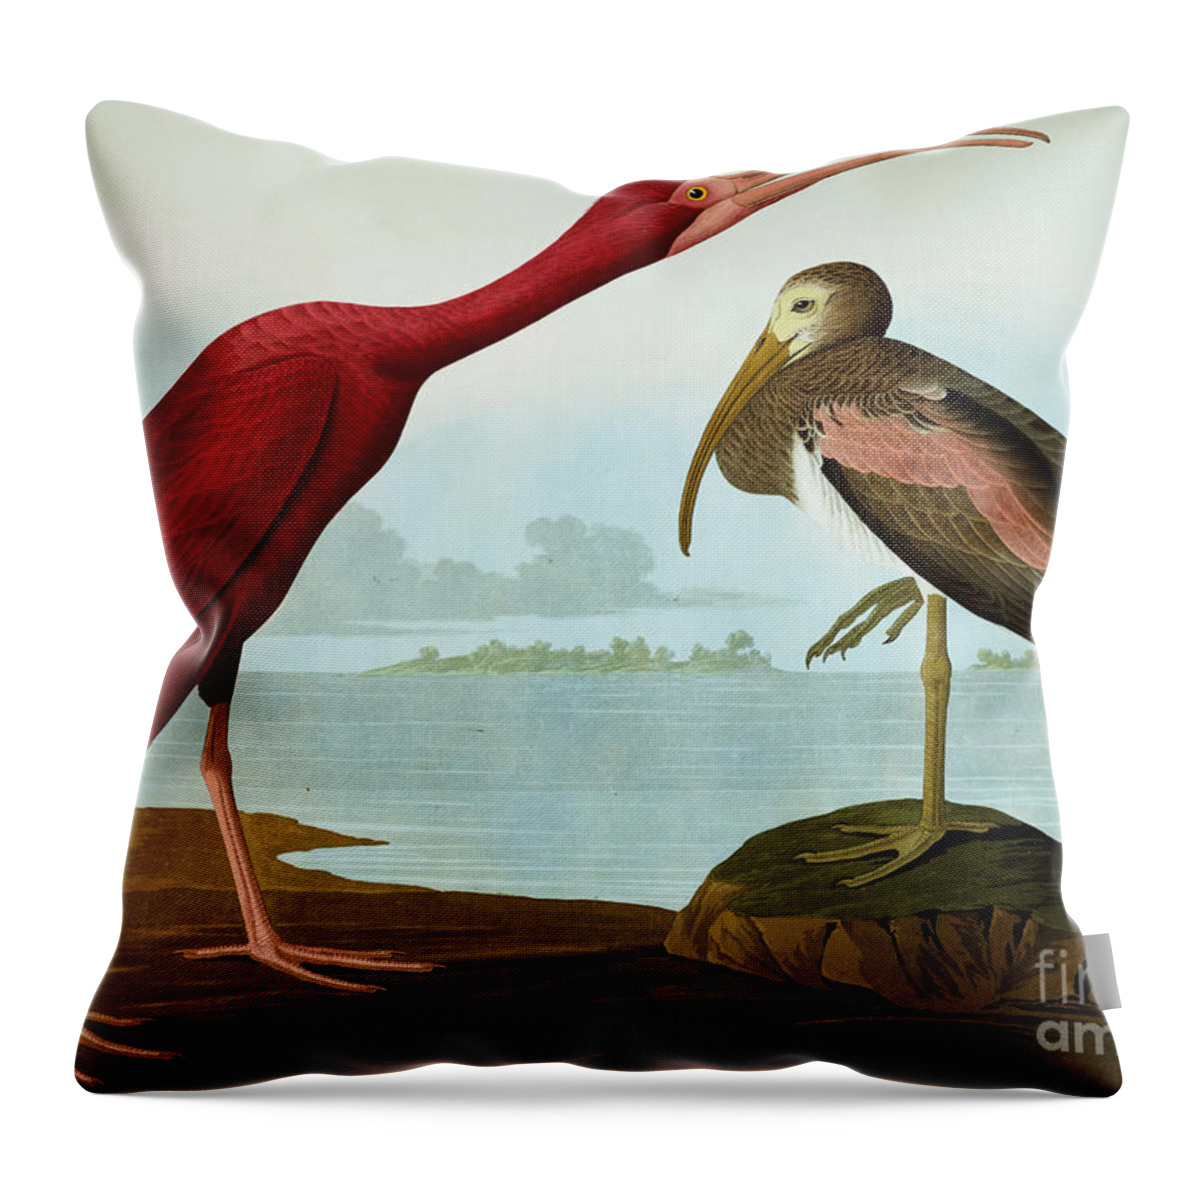 Scarlet Ibis Throw Pillow featuring the painting Scarlet Ibis by Audubon by John James Audubon